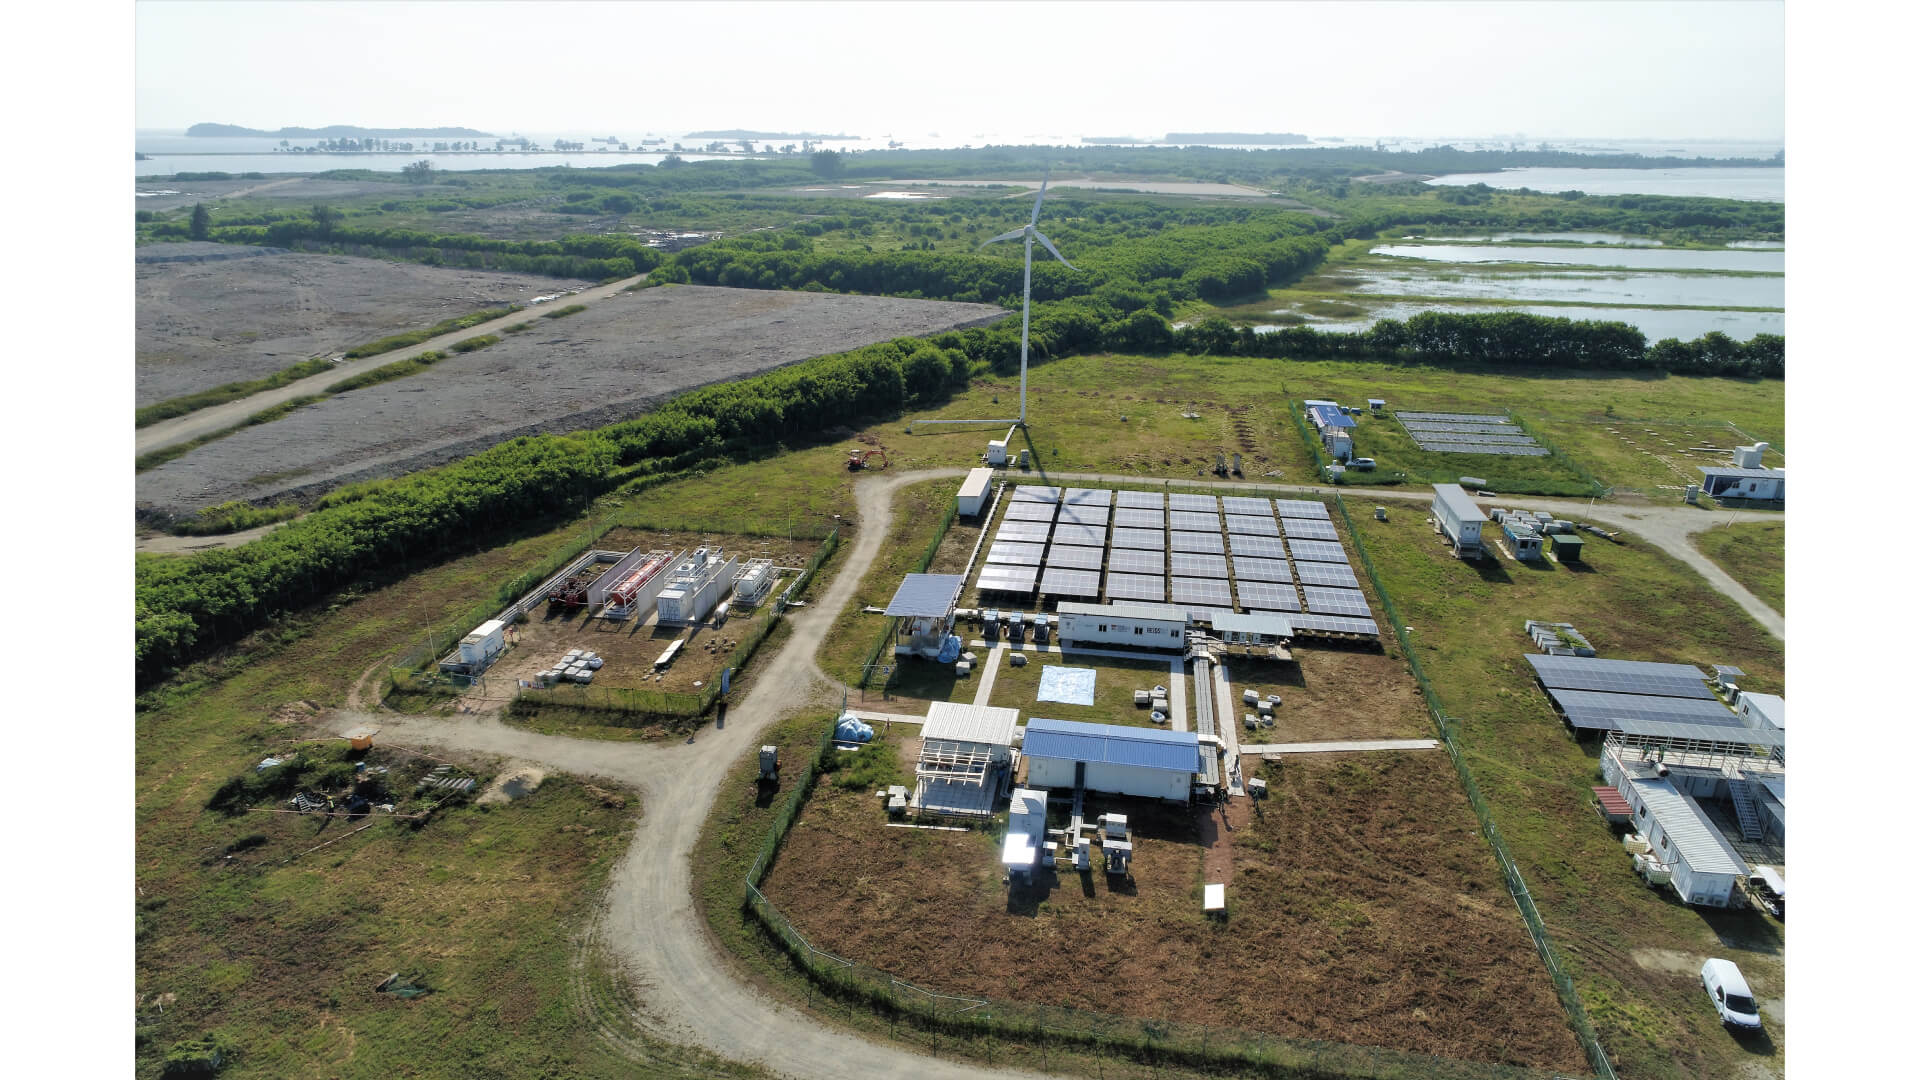 Photo 1 (Arial view of the REIDS-SPORE microgrid at Singapore’s Semakau Island.  Photograph courtesy of ENGIE South East Asia)